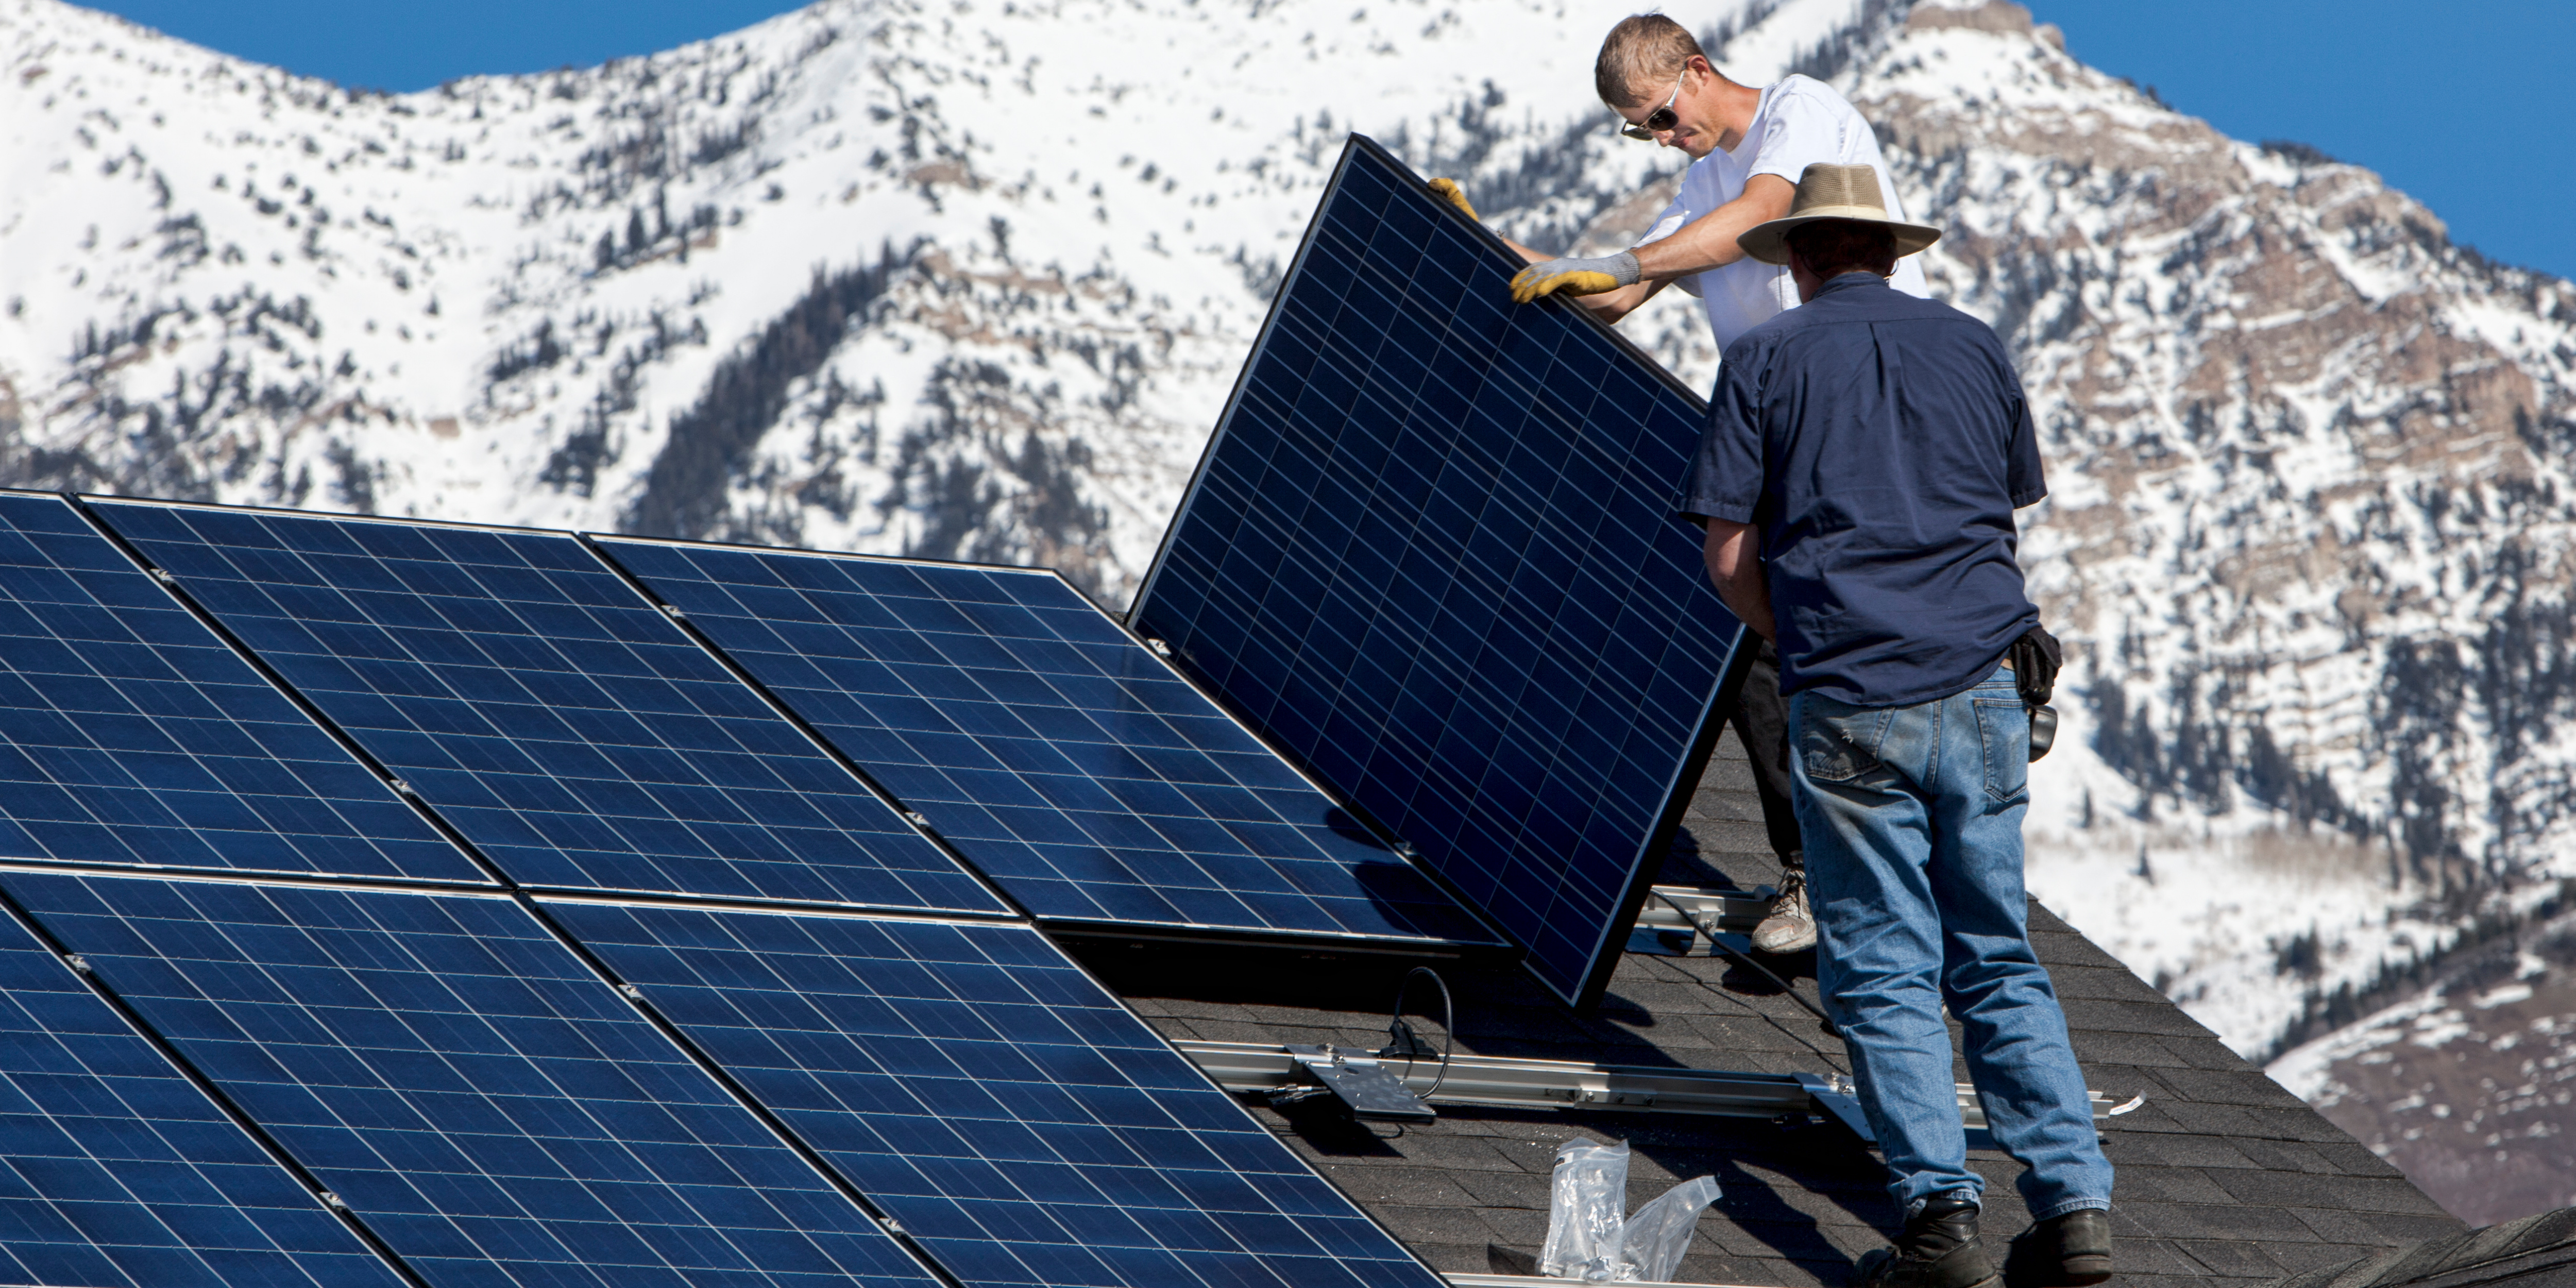 Solar Installers Installing Panels on a Rooftop